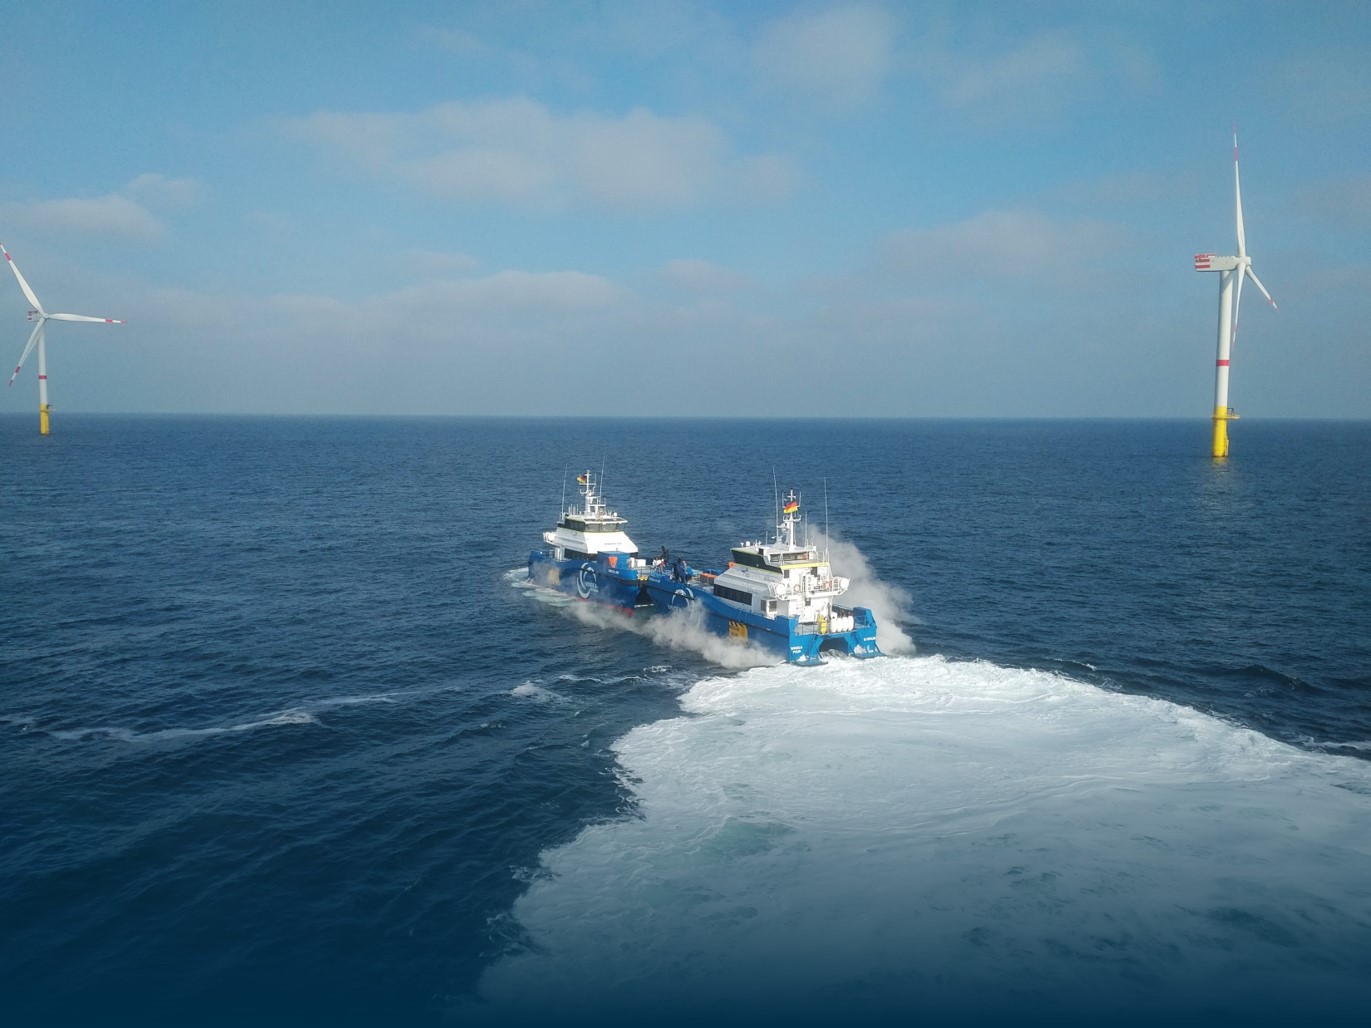 WINDEA Four and WINDEA Six vessels at Nordsee One offshore wind farm